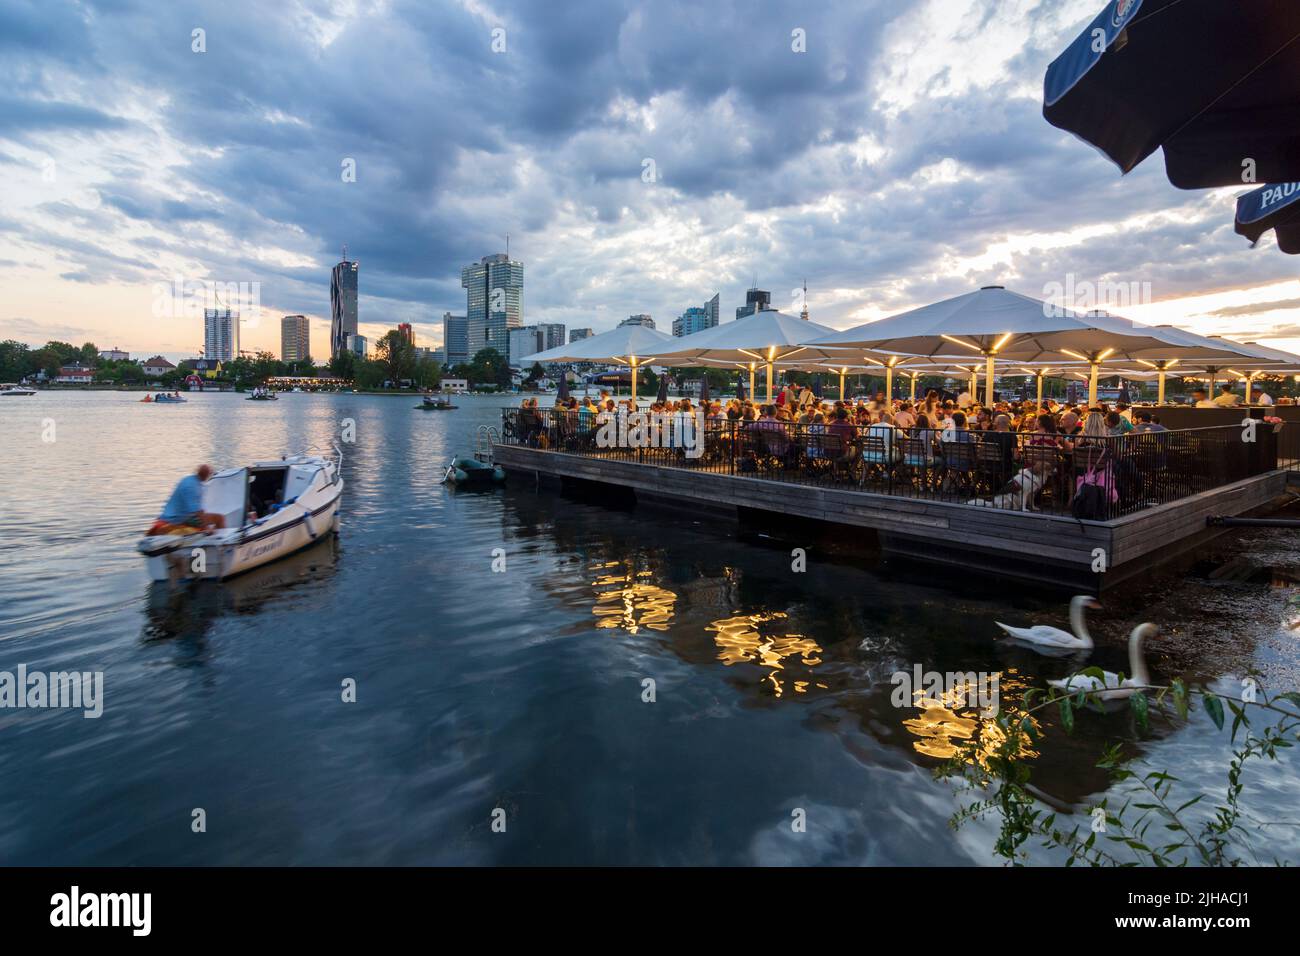 Wien, Vienna: oxbow lake Alte Donau (Old Danube), sunset, floating restaurant Strandcafe, Donaucity with DC Tower 1 and IZD Tower, Donauturm (Danube T Stock Photo